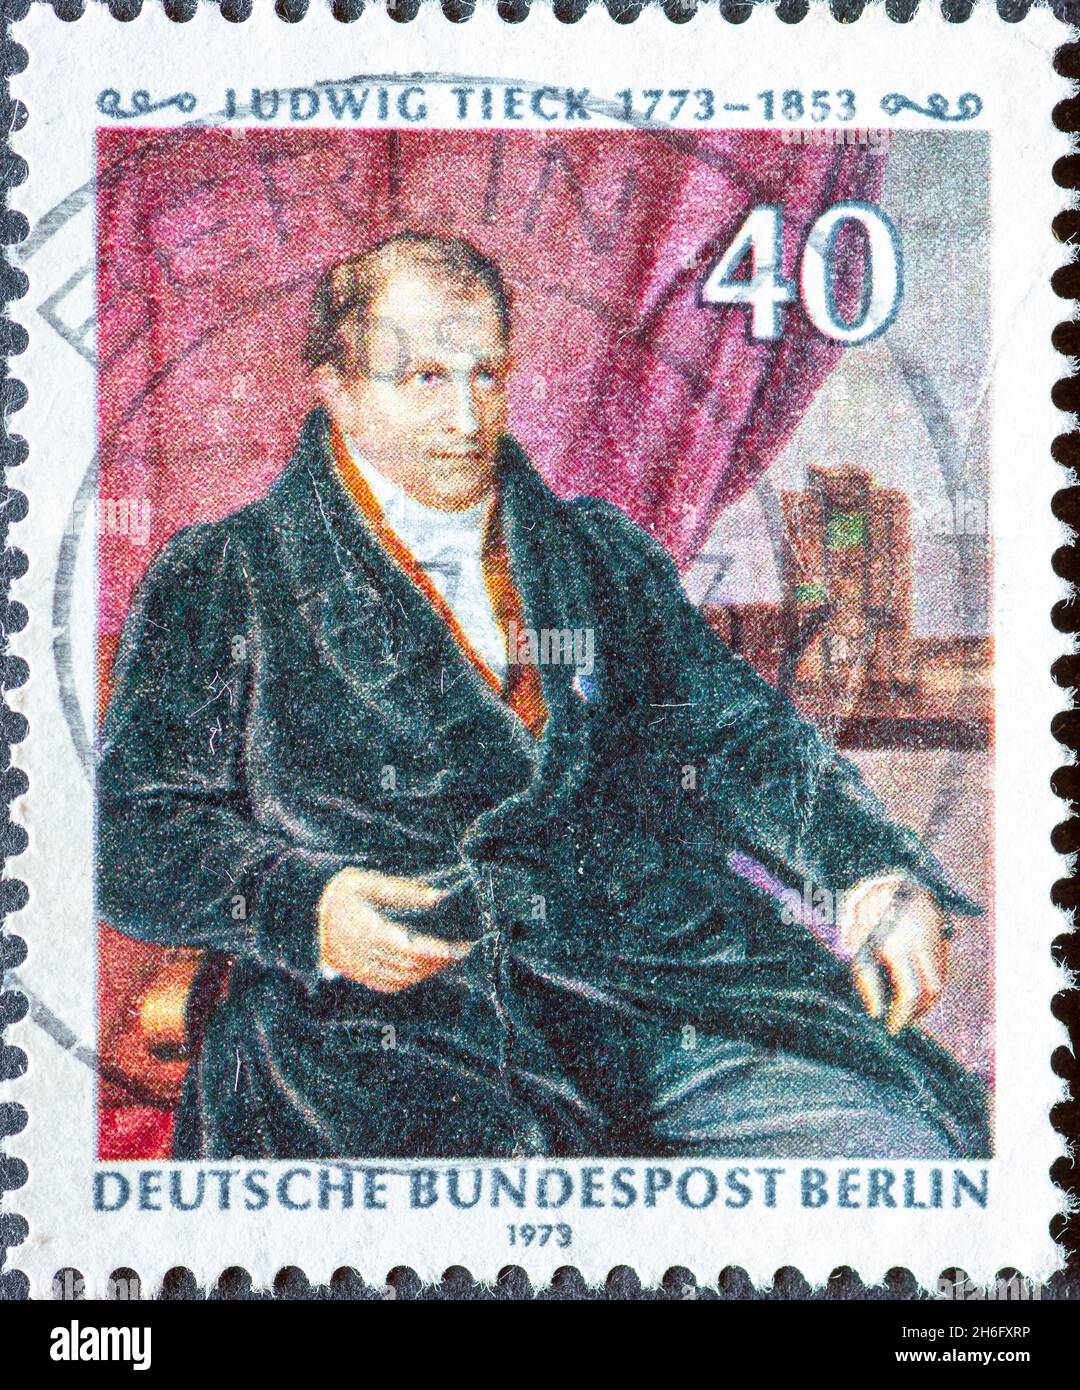 GERMANY, Berlin - CIRCA 1973: a postage stamp from Germany, Berlin showing a portrait of the poet, writer, editor and translator Ludwig Tieck 1773 - 1 Stock Photo